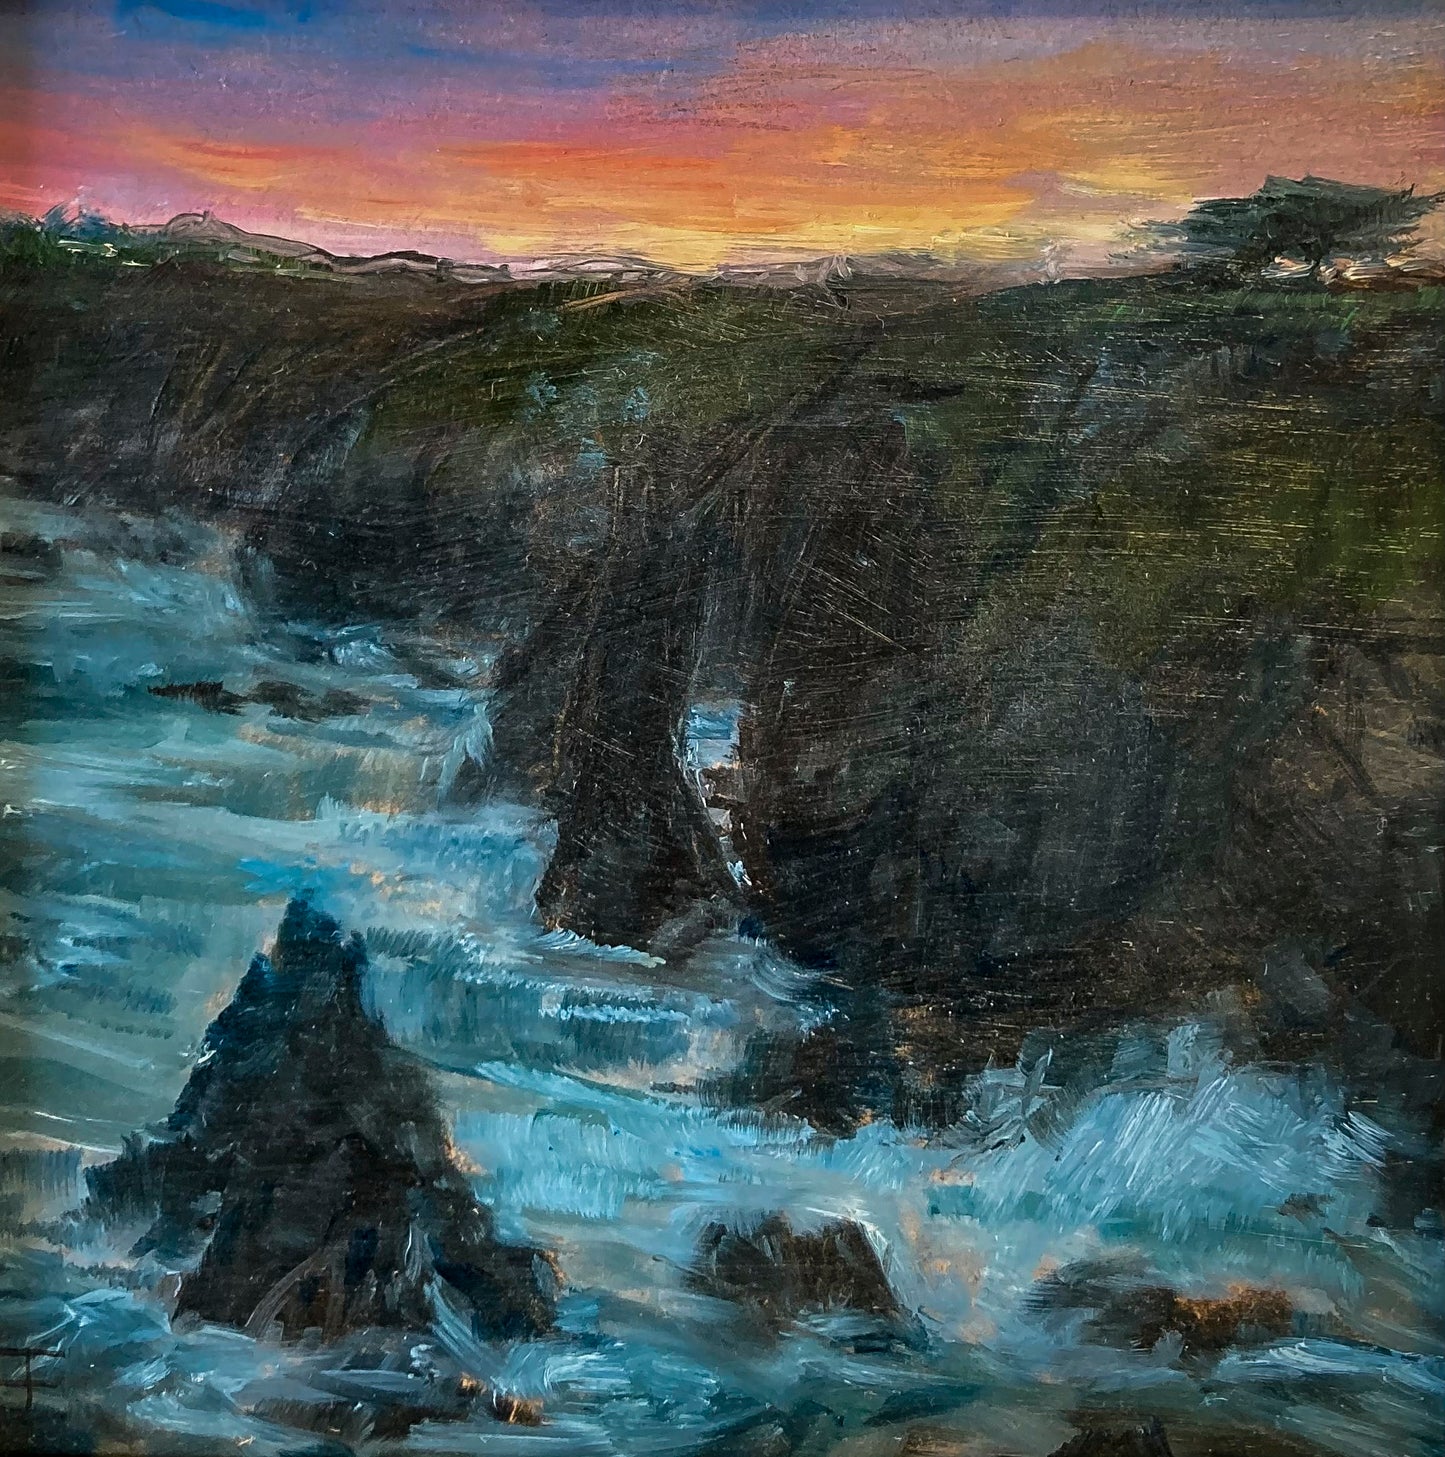 Colorful oil painting; impressionistic view of coastline w/water, cliffs, and sunset sky; 6"x6" image; artist E. E. Jacks